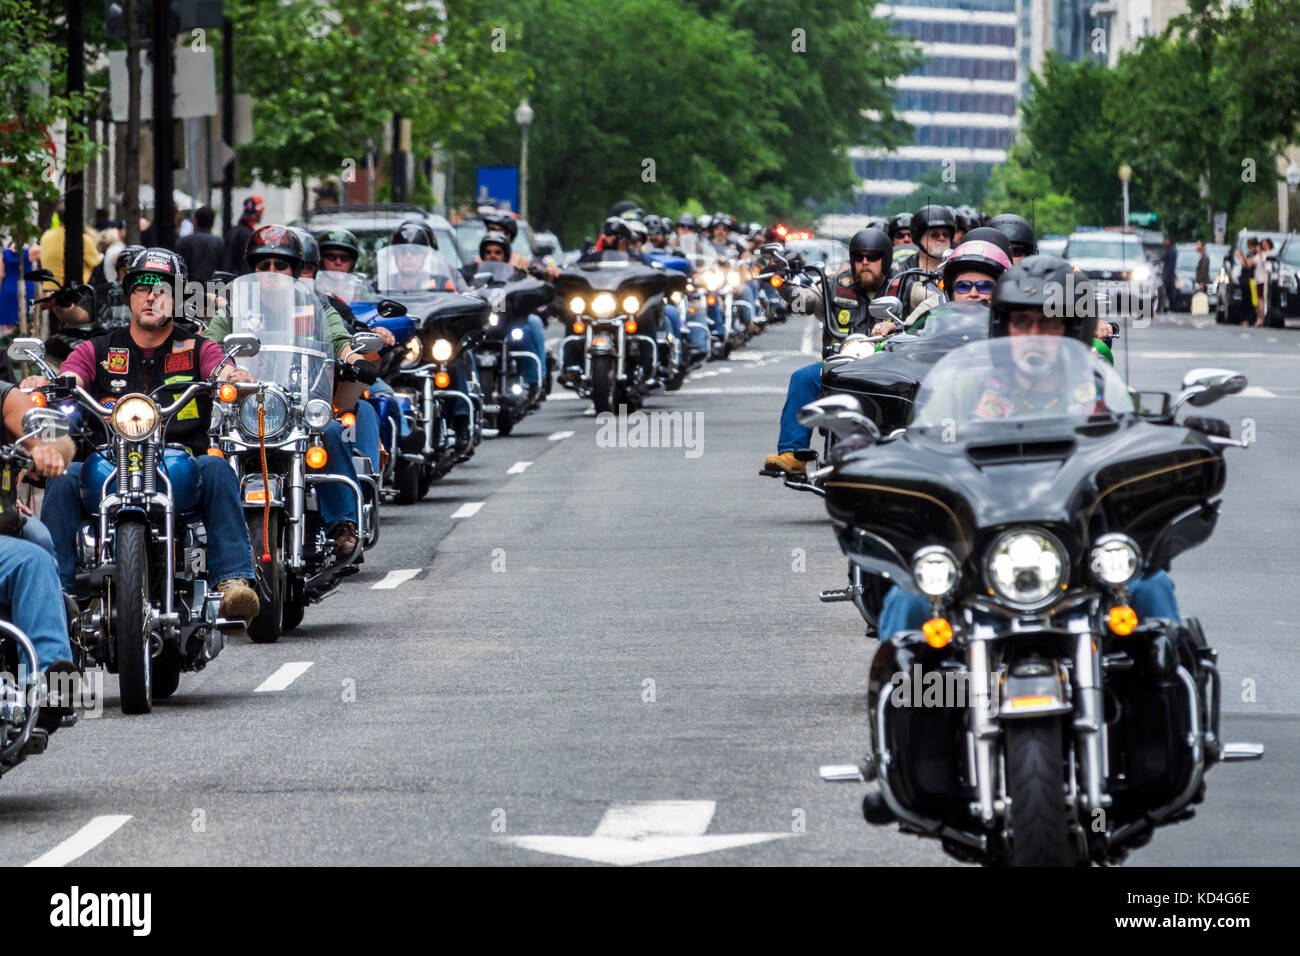 Washington DC,Downtown,Rolling Thunder,motorcycle rally,participant,riding,DC170527174 Stock Photo